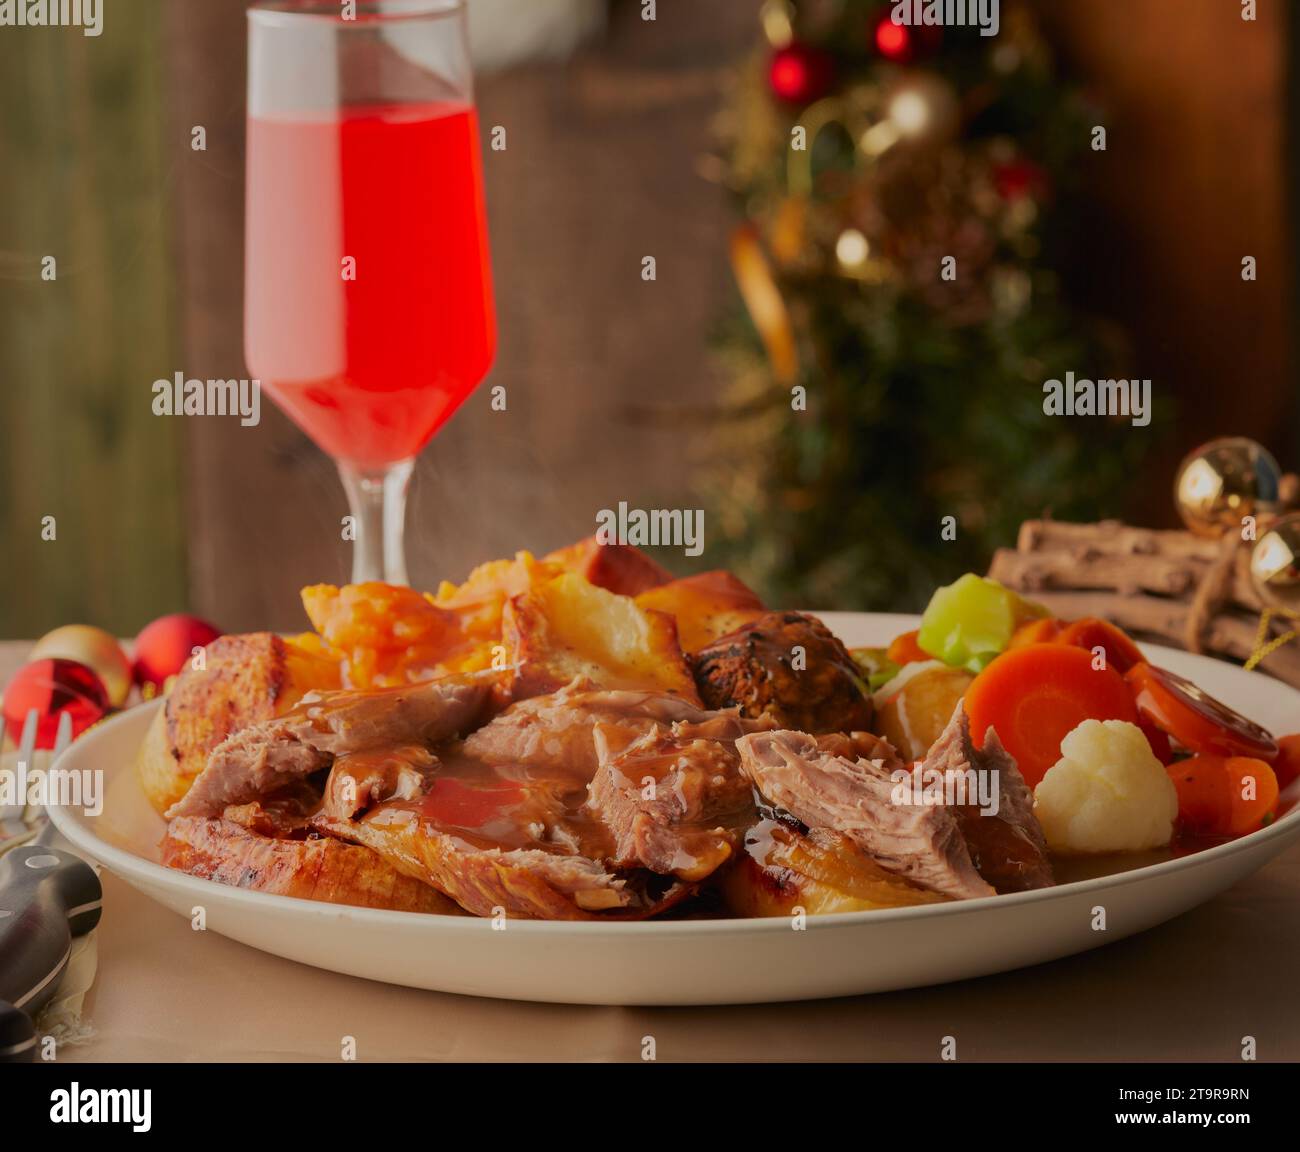 Christmas turkey dinner with decorations and a glass of red wine. Stock Photo